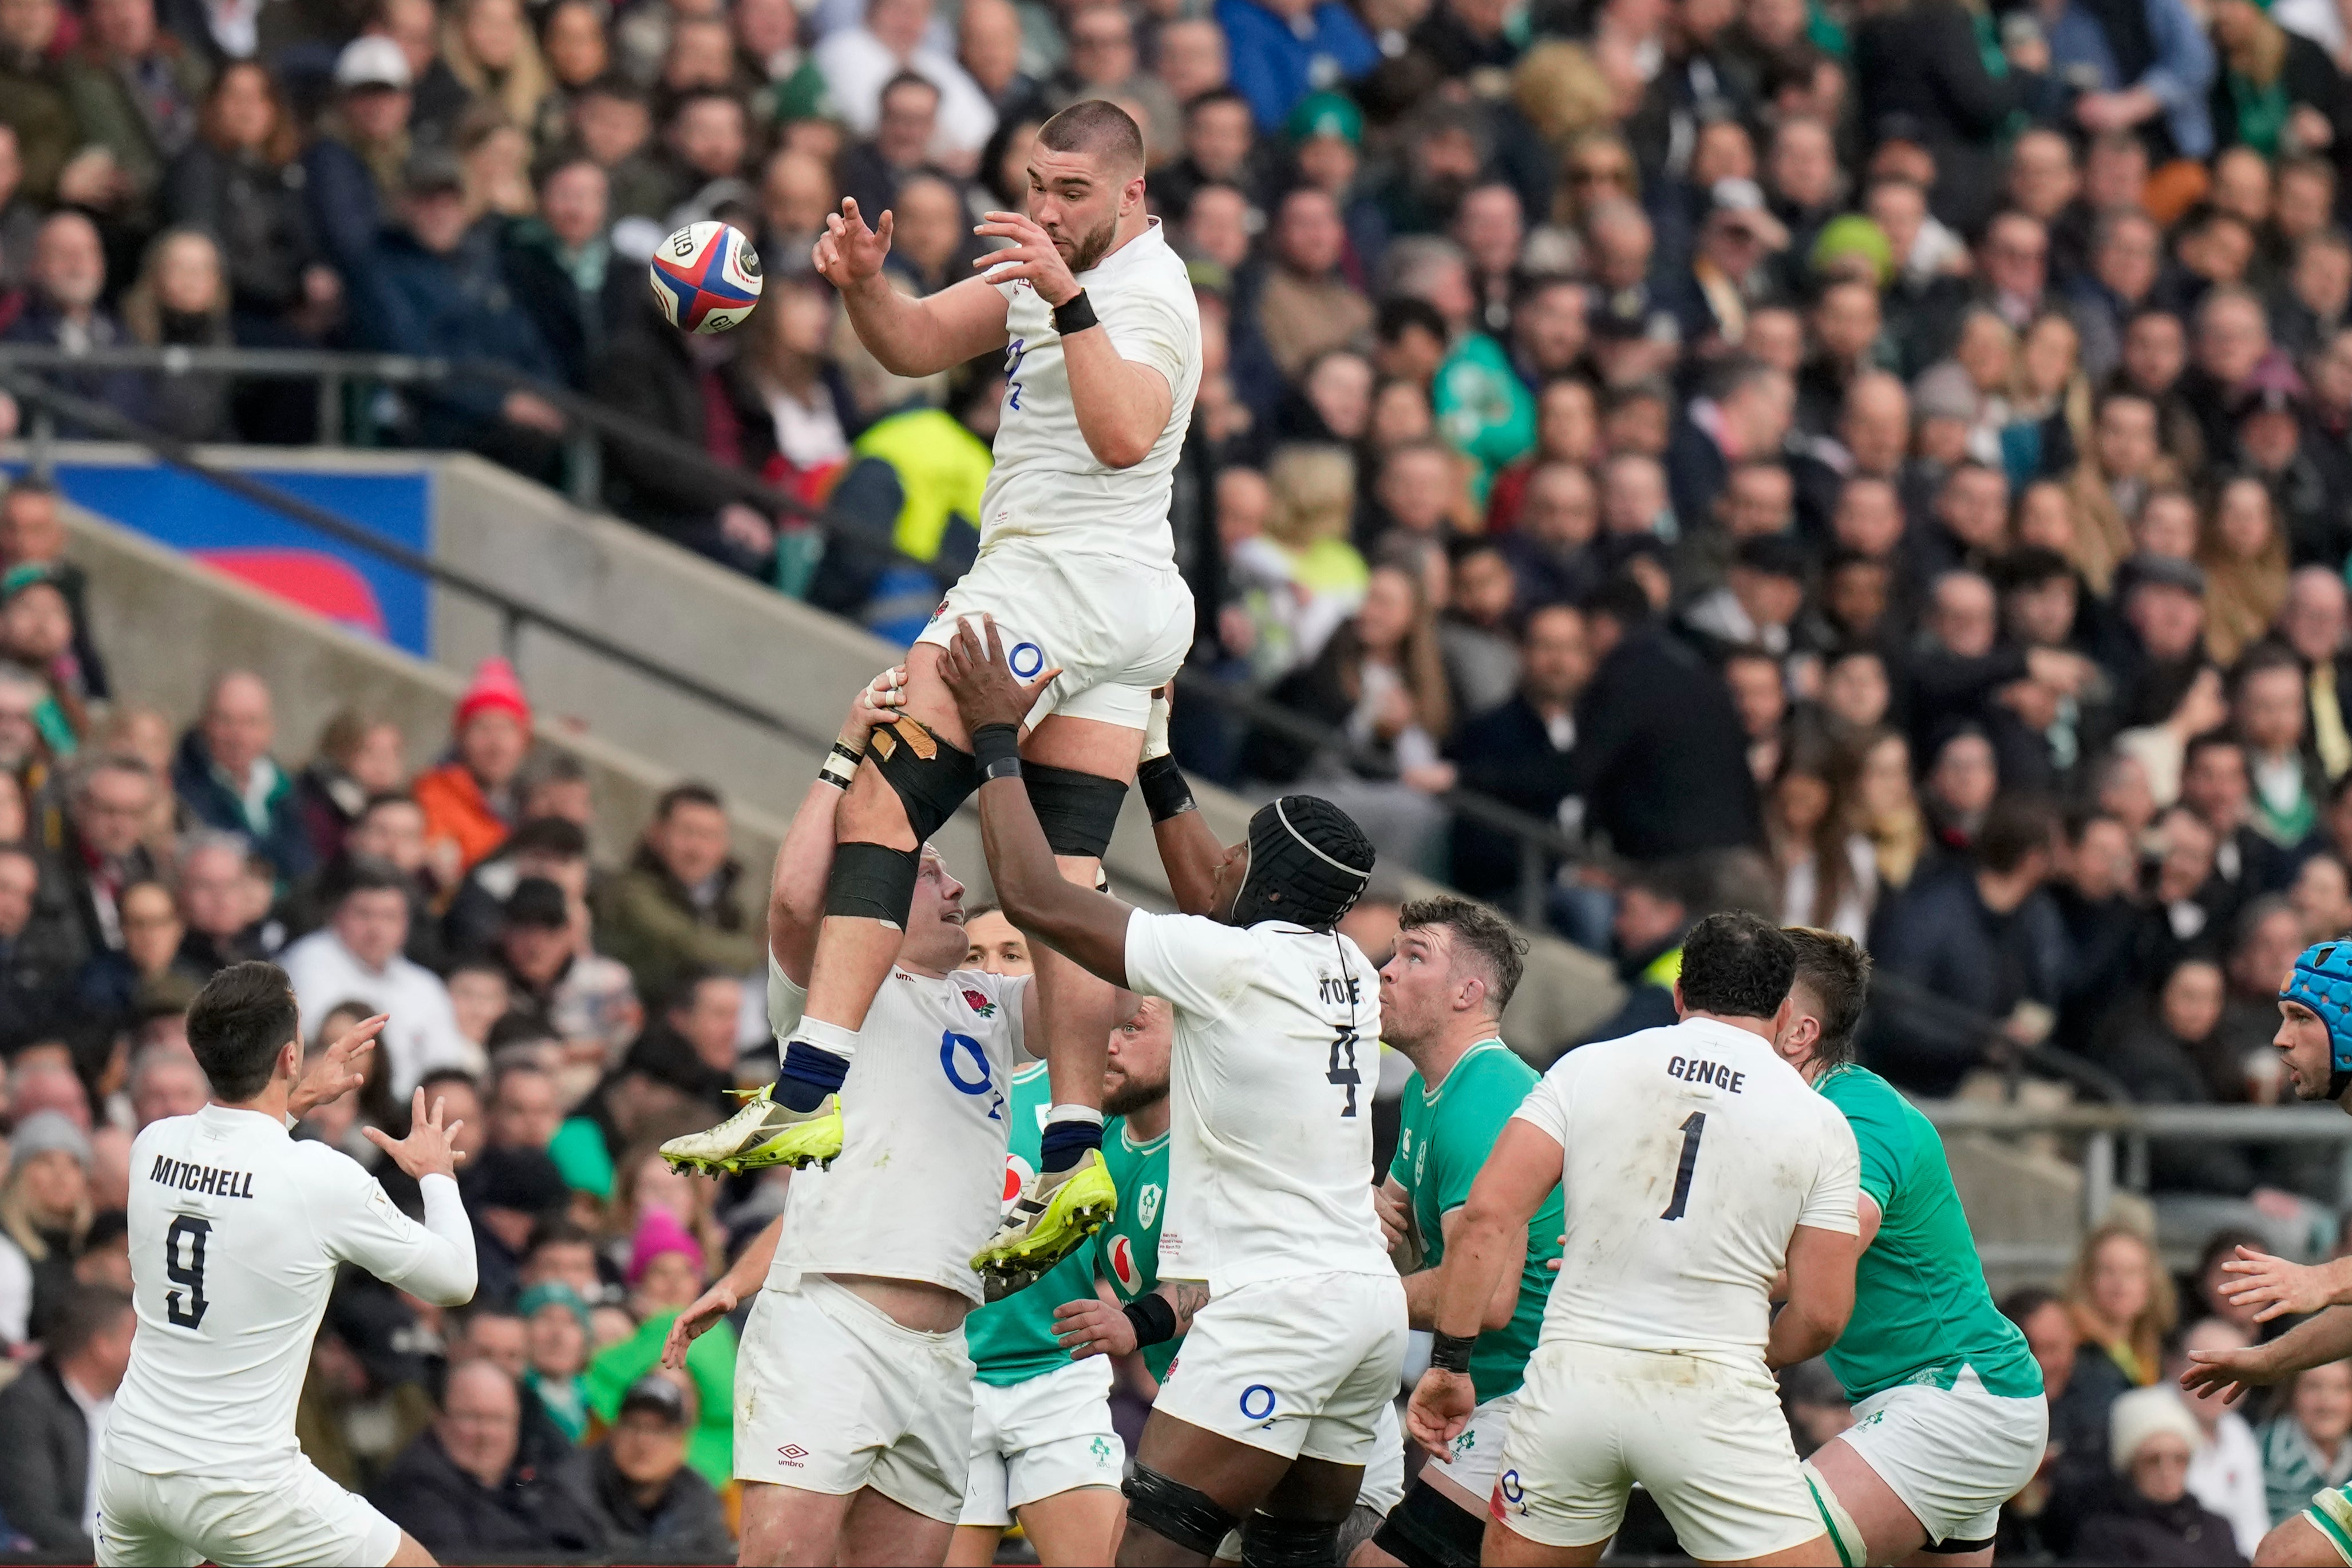 George Martin helped England dominate the lineout